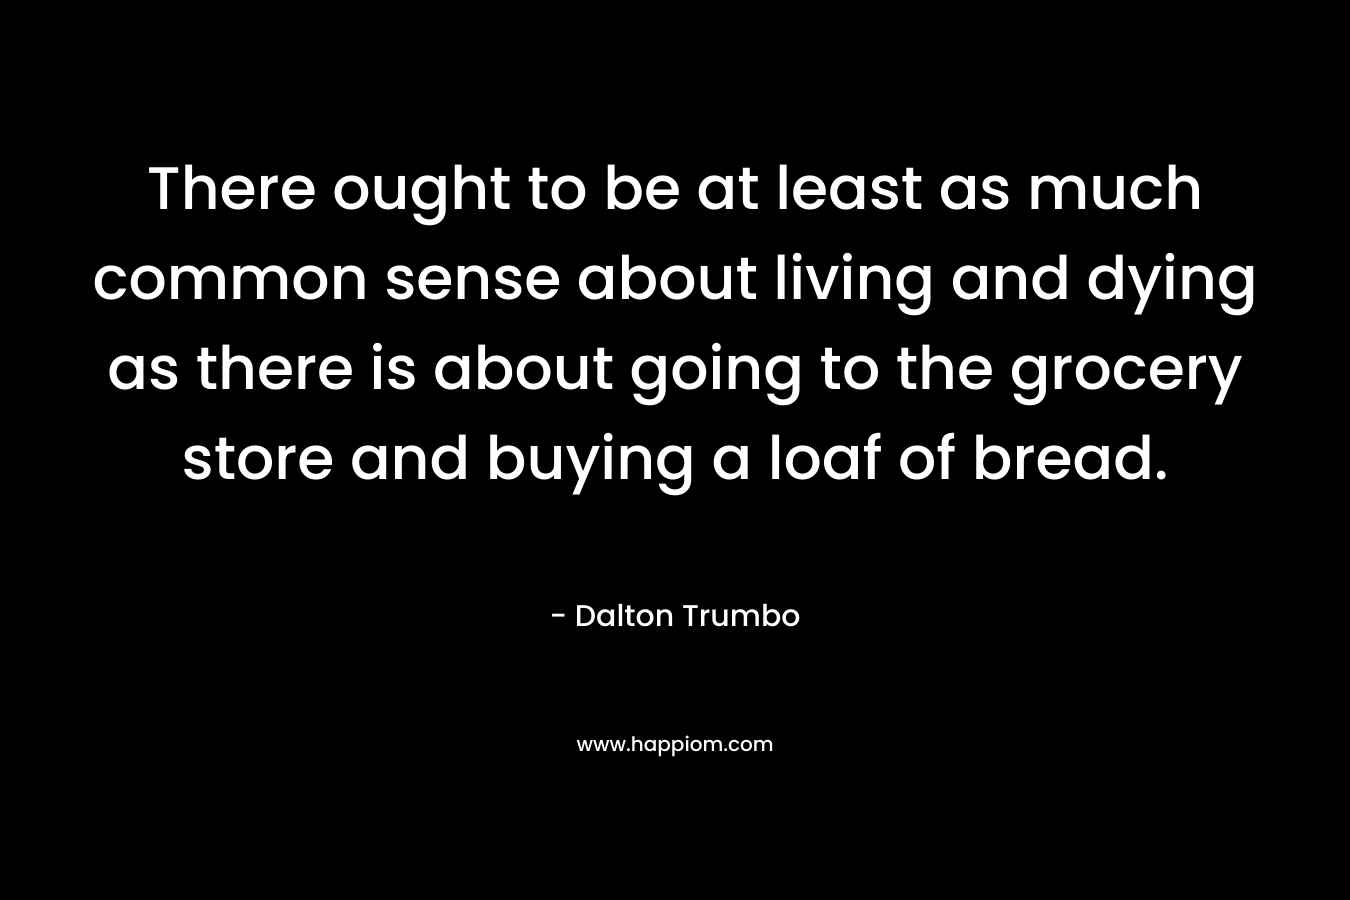 There ought to be at least as much common sense about living and dying as there is about going to the grocery store and buying a loaf of bread.